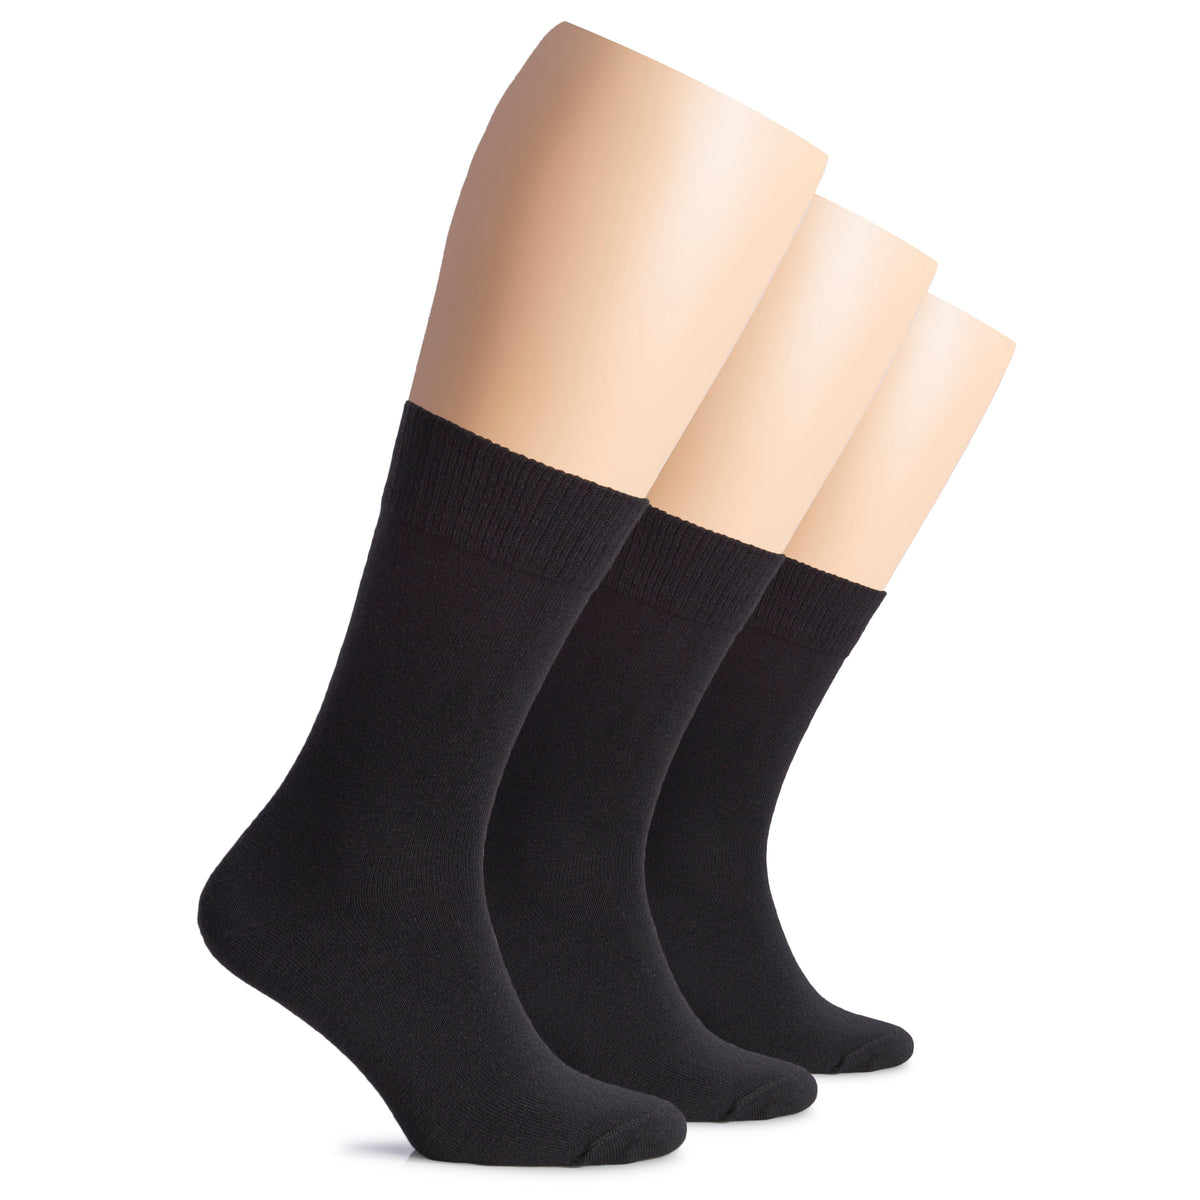 On a white backdrop, three black wool women's crew socks are displayed.